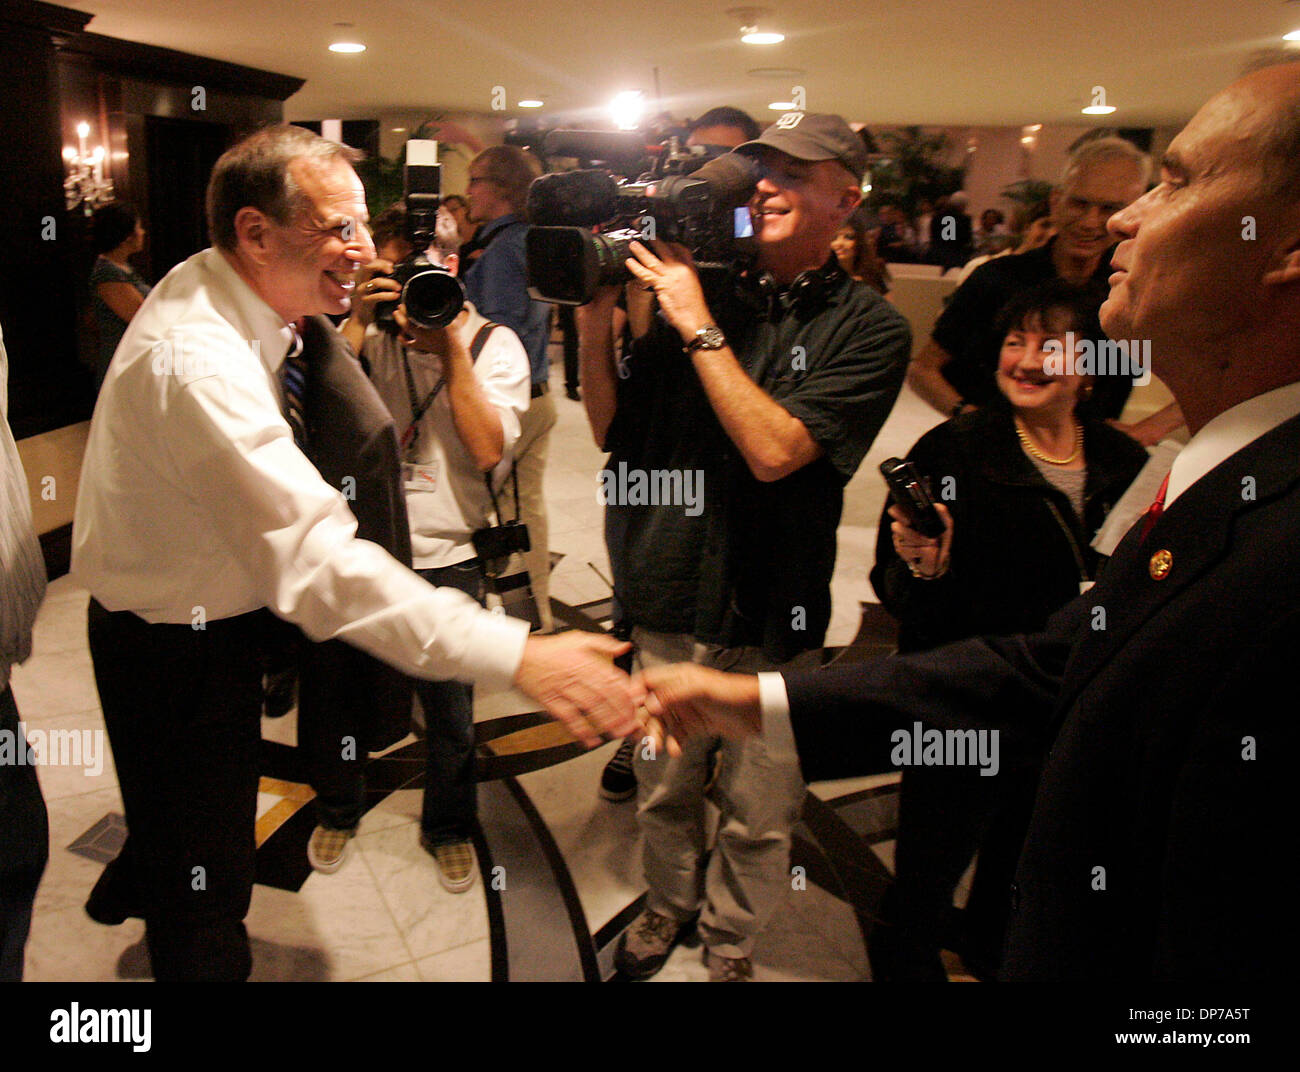 Nov 07, 2006; San Diego, CA, USA; Re-elected San Diego area congressmen, Democrat BOB FILNER and Republican BRIAN BILBRAY run into each other at the elevators in the U. S. Grant hotel and shake hands. Their relative House majority/minority status just changed. Mandatory Credit: Photo by Howard Lipin/SDU-T/ZUMA Press. (©) Copyright 2006 by SDU-T Stock Photo